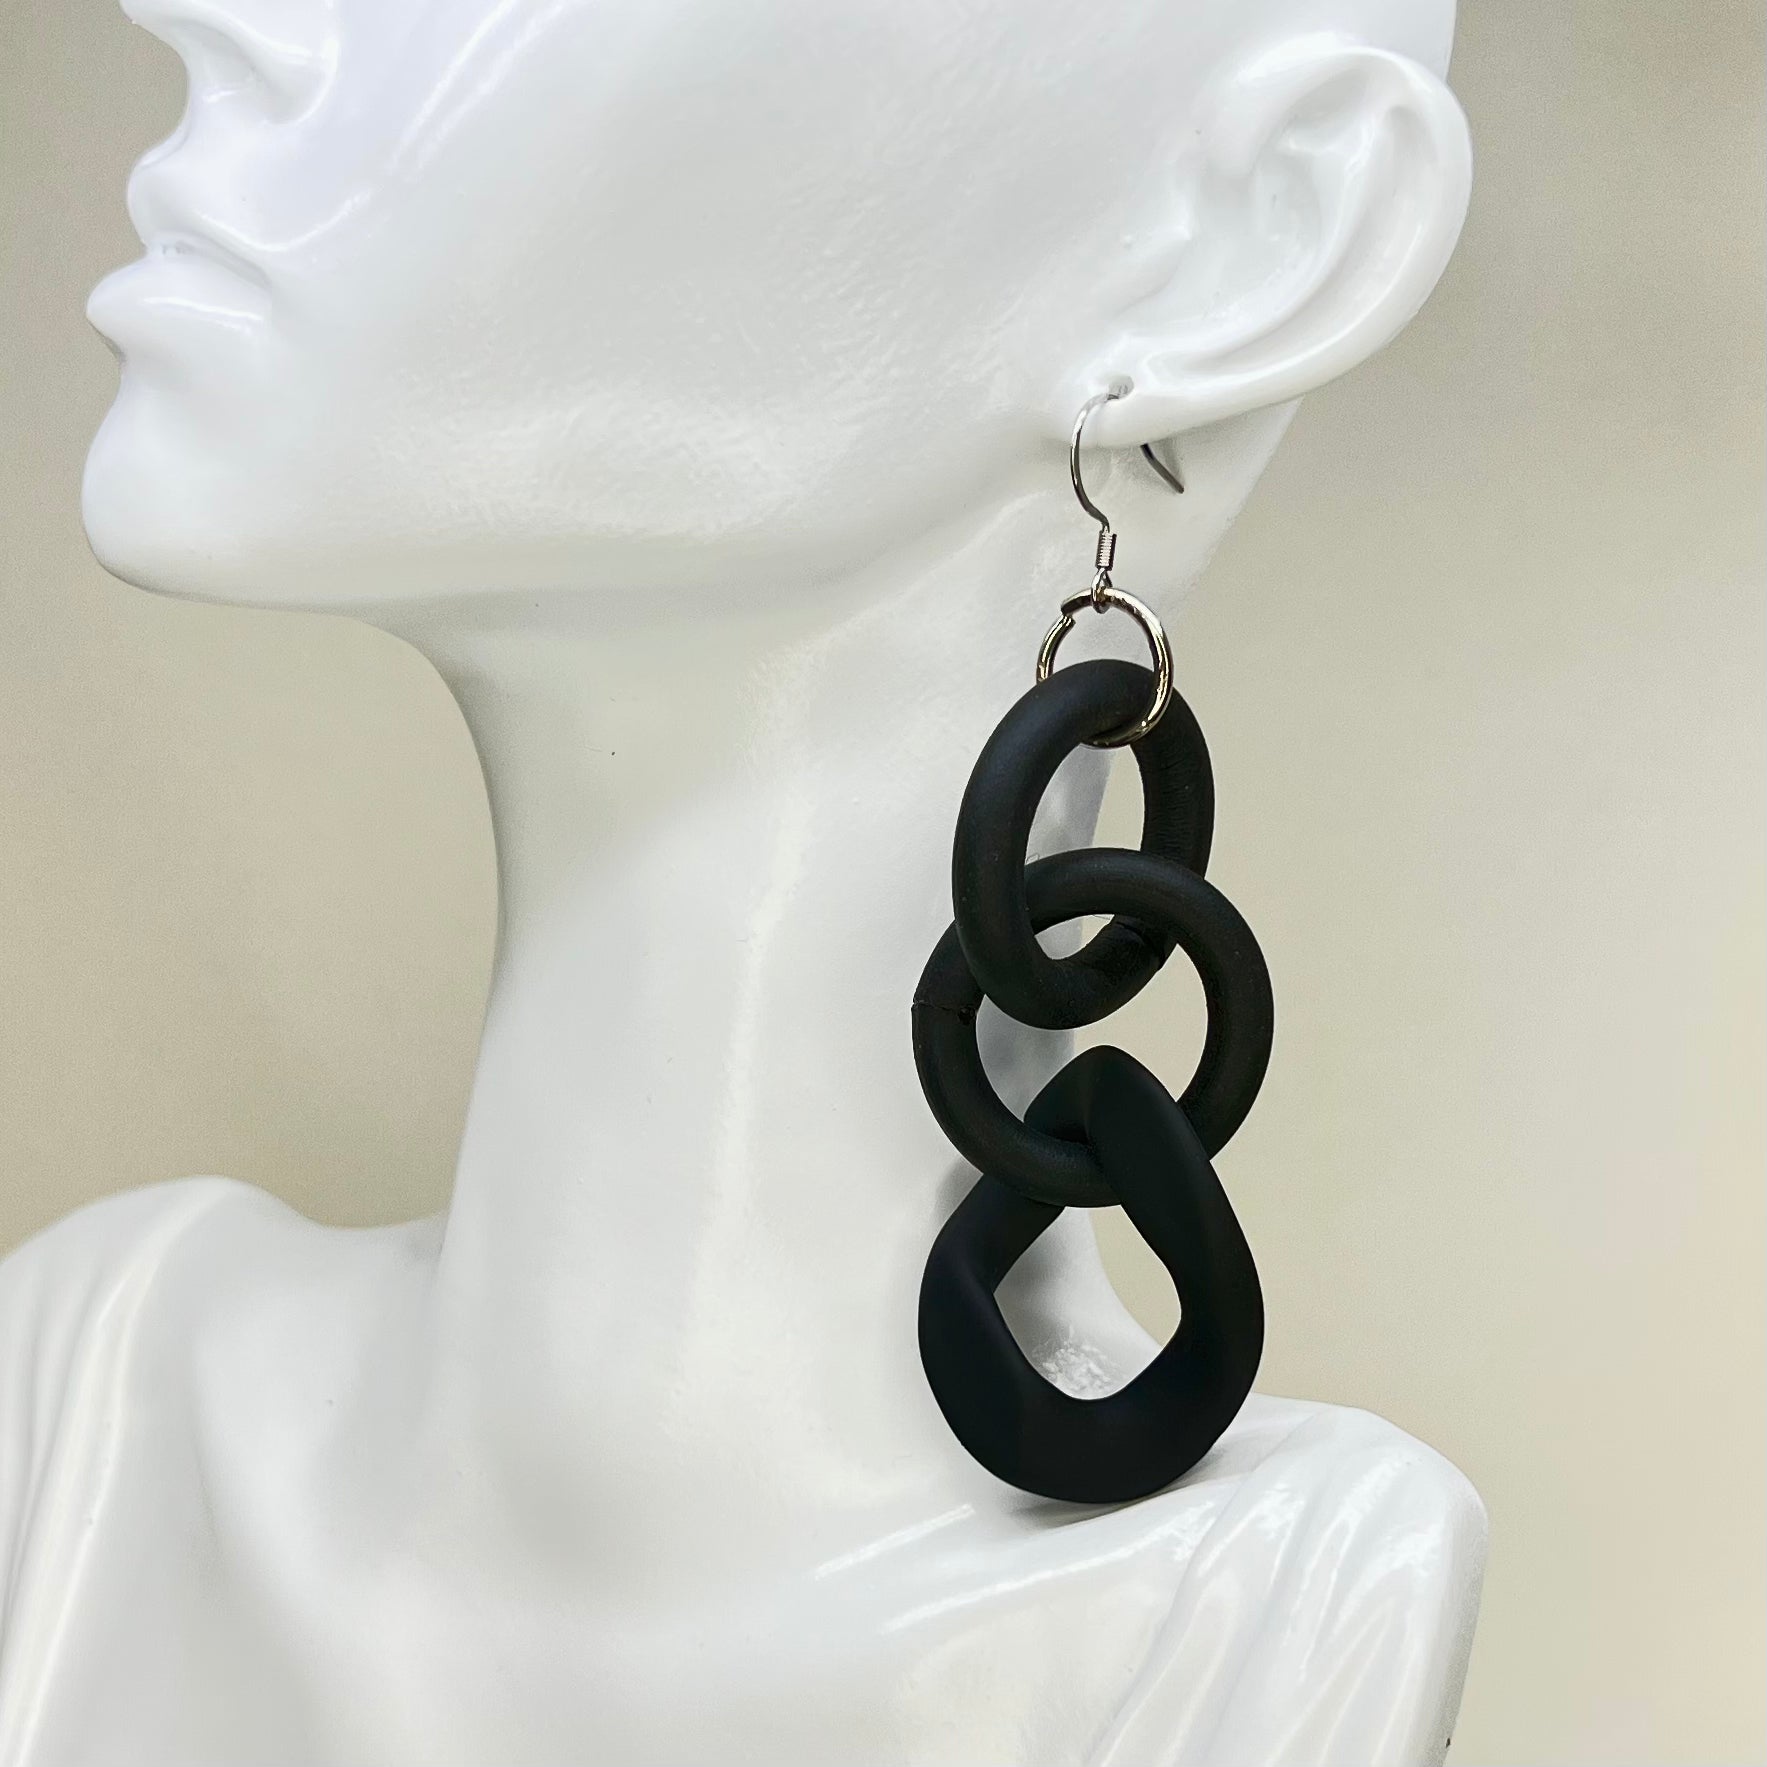 Plastic Earring Accessories, Rubber Earring Accessories